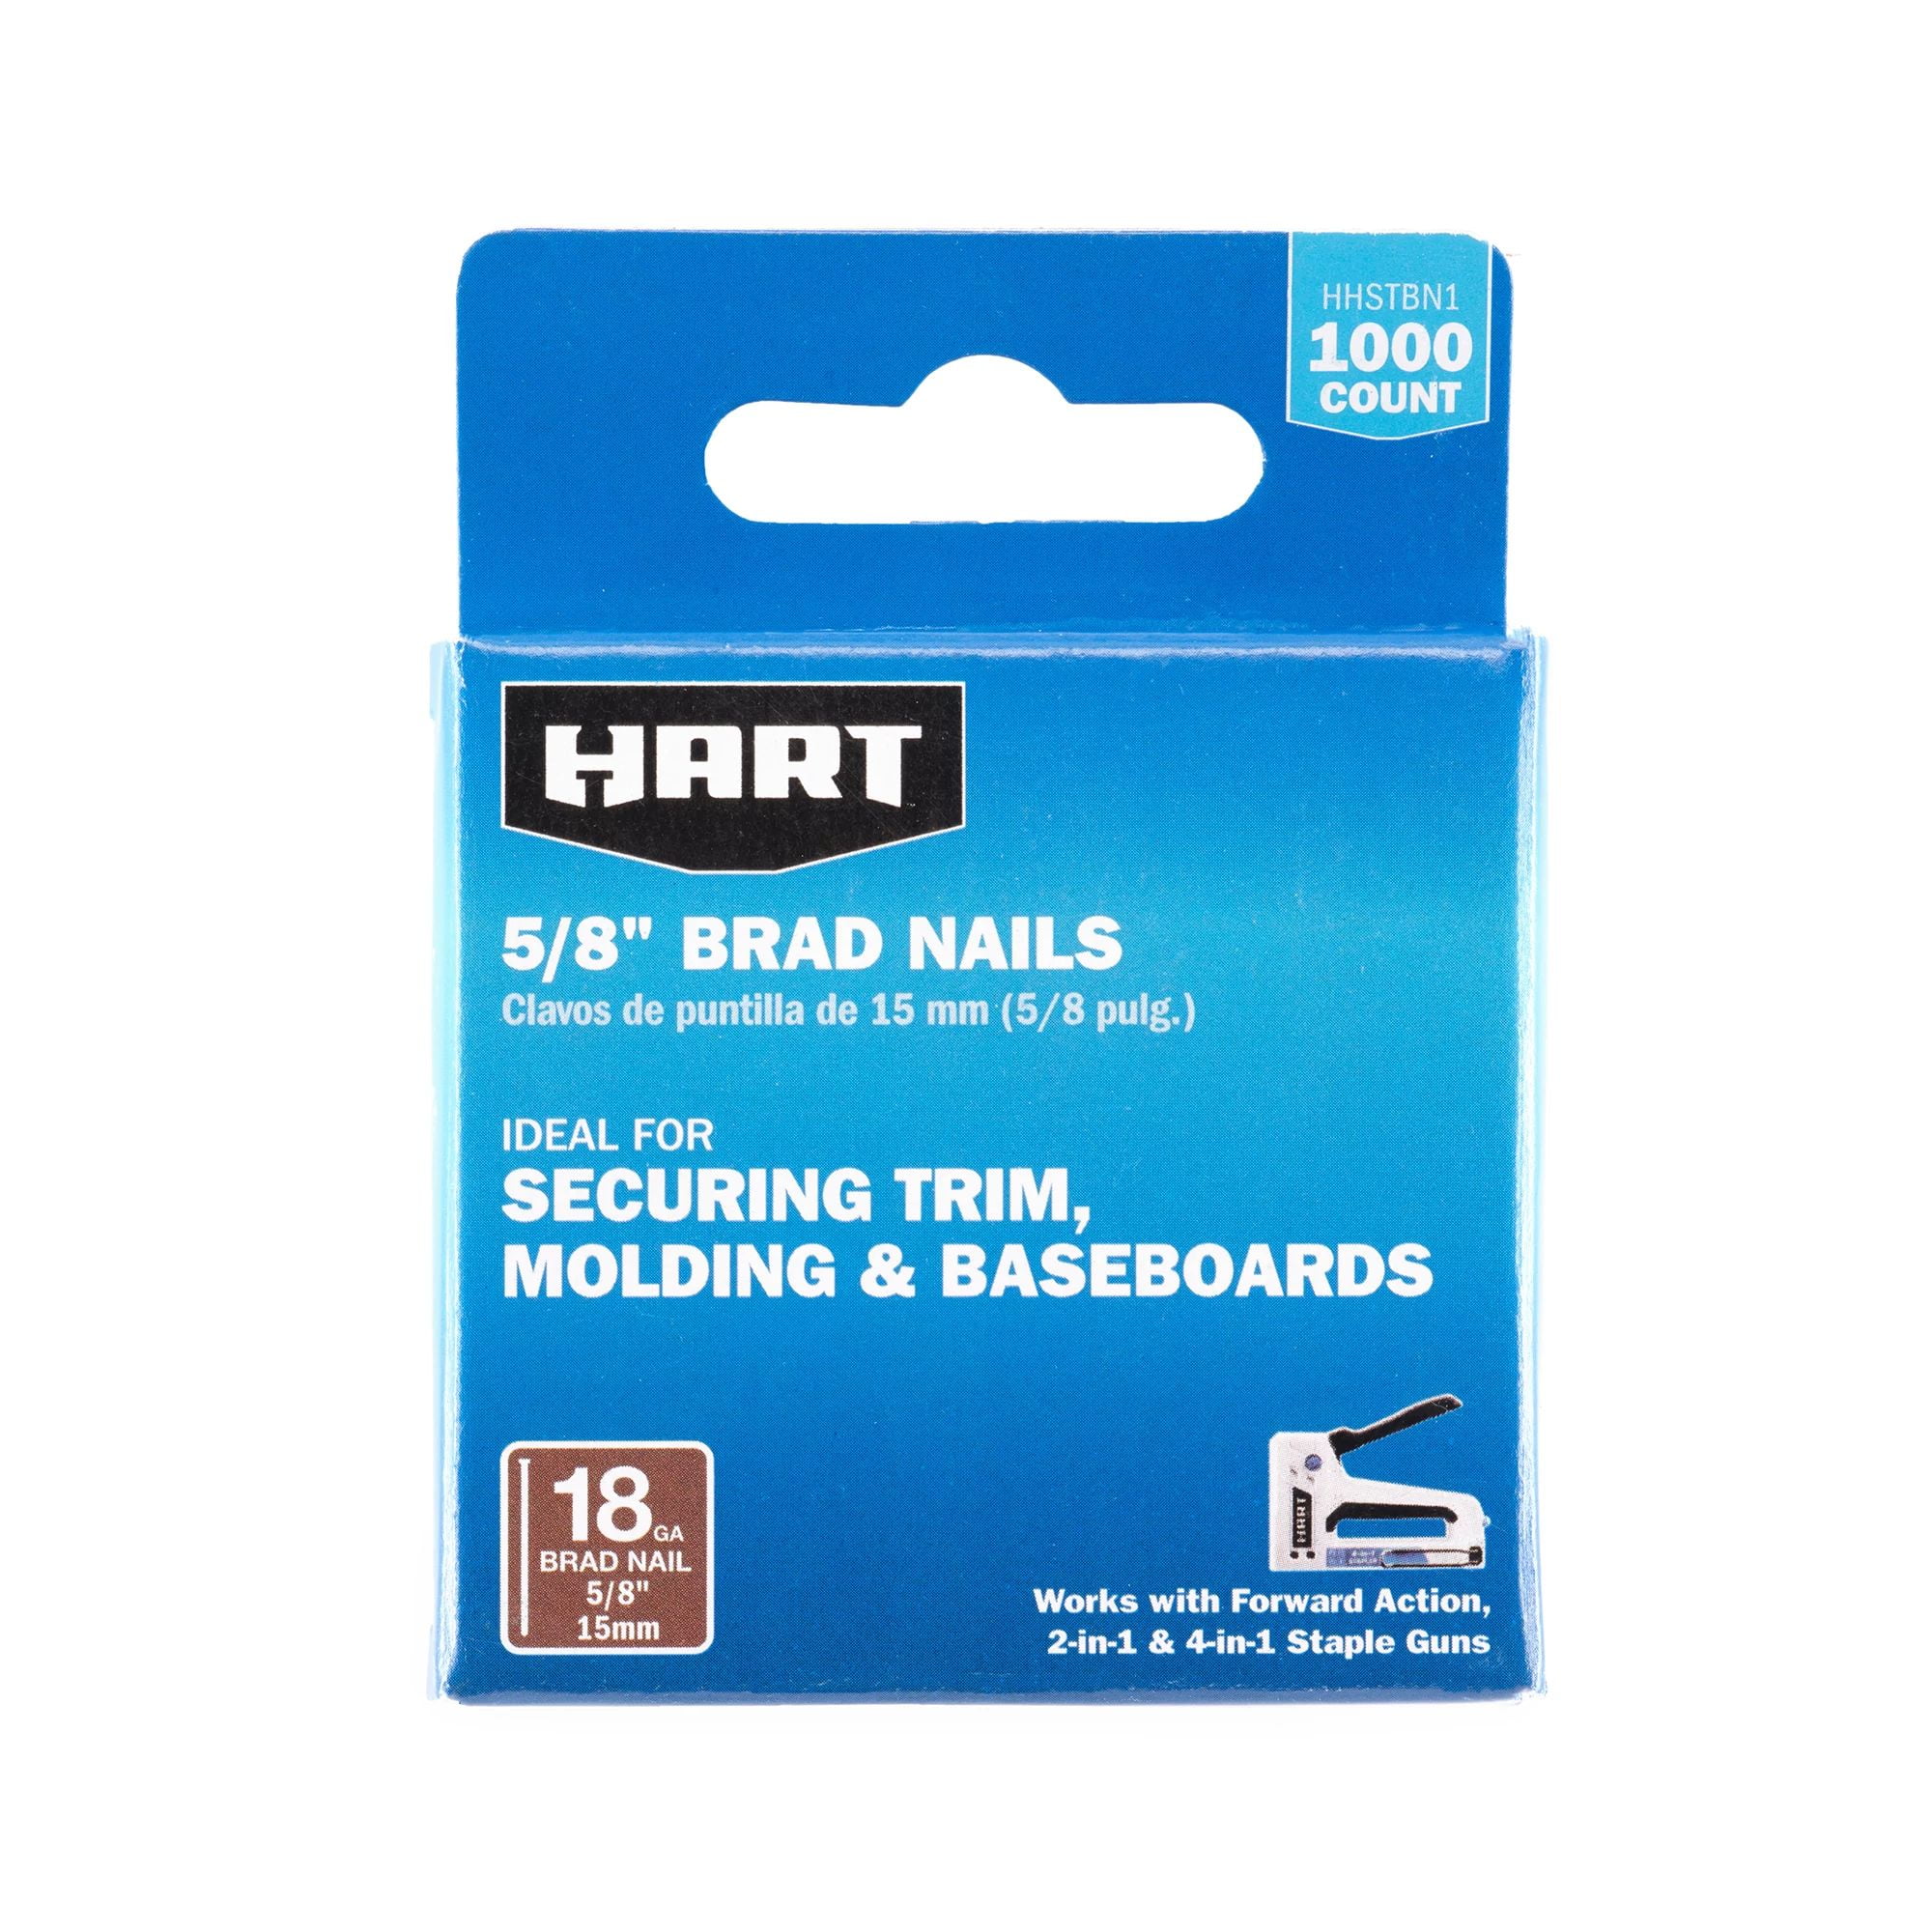 HART 5/8-inch Brad Nails (1,000 Count) for Securing Trim, Molding & Baseboards